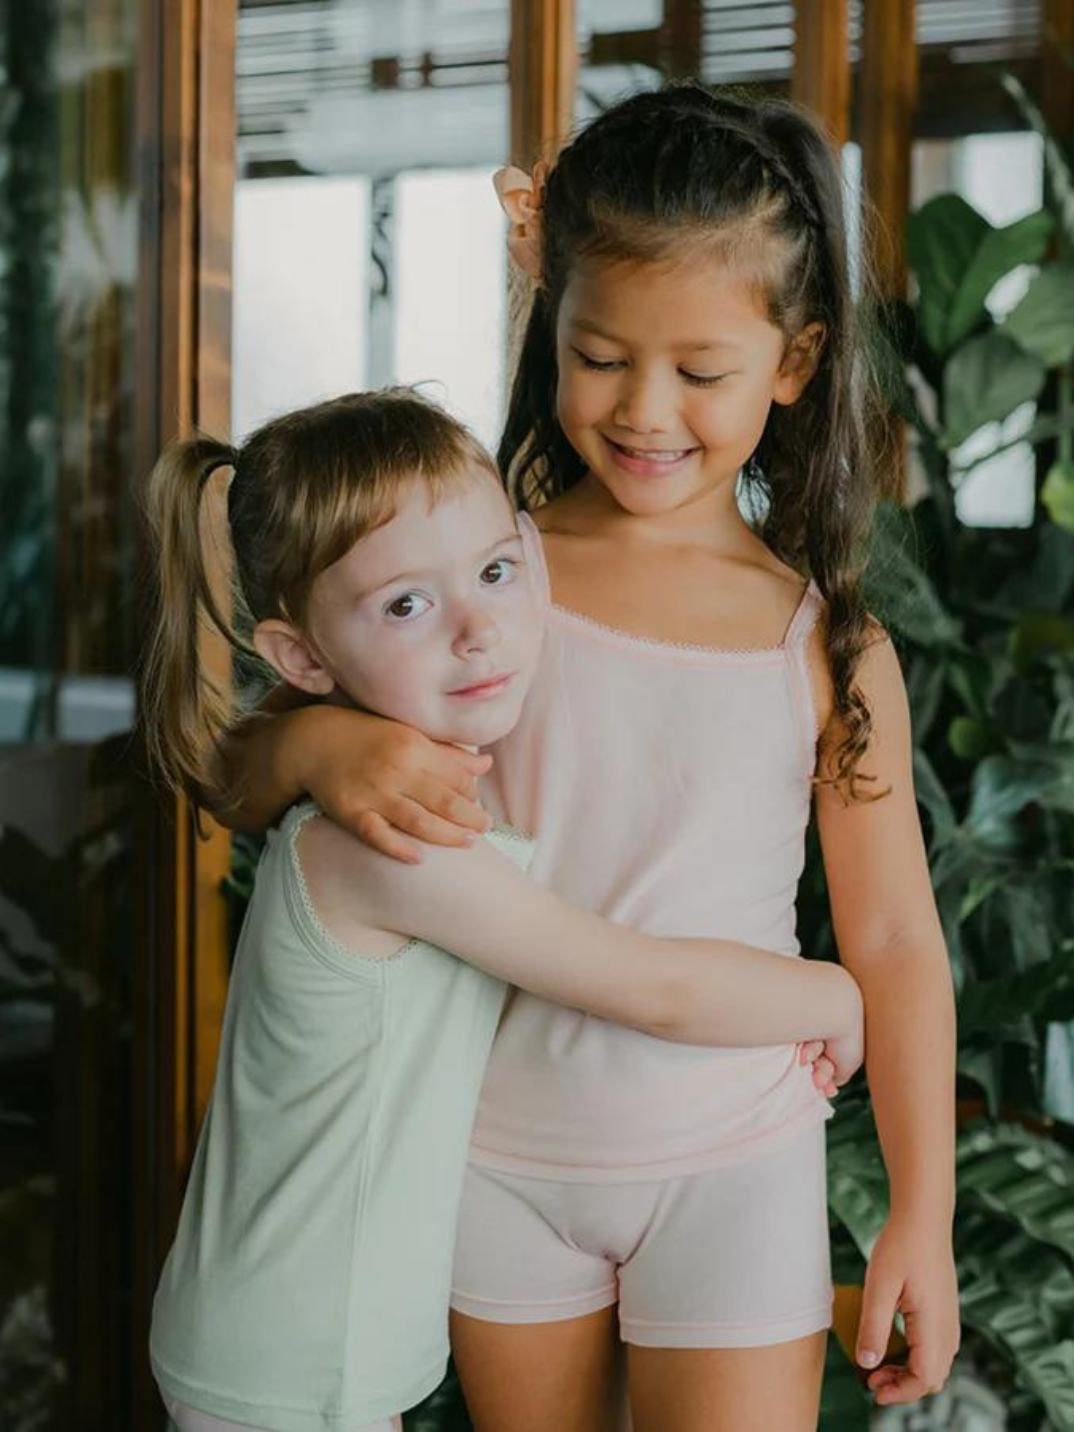 Just Peachy Camisoles are super soft and gentle on your little ones' skin. Designed with a snug fit for play, movement and a comfy night's rest. Add the breathable Camisole layer under your day clothes or snooze in maximum comfort. Pink and green children's camis. Comes in a 2-pack